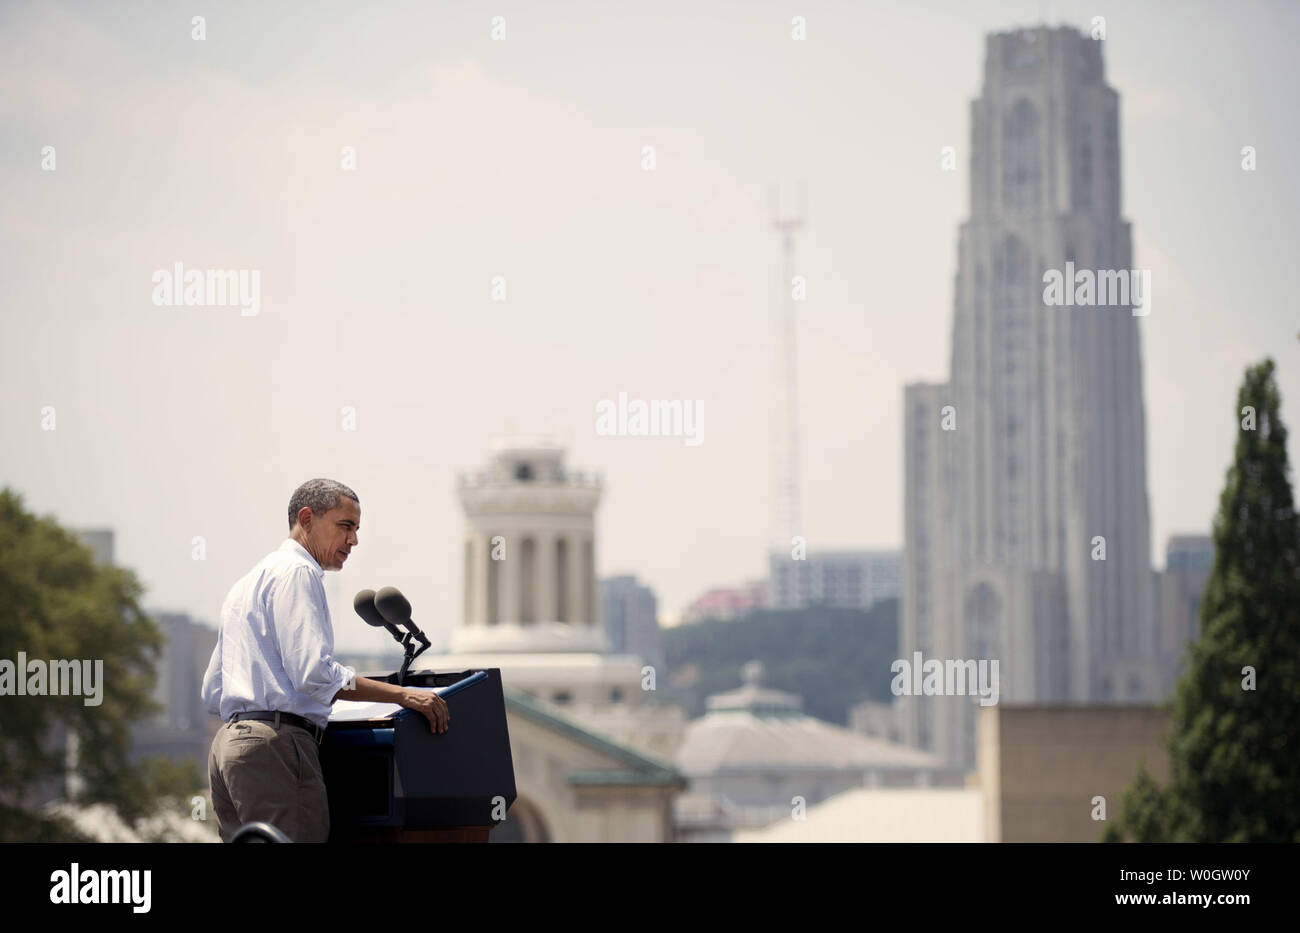 President Barack Obama delivers remarks at a campaign on the campus of Carnegie Mellon University in Pittsburgh, Pennsylvania on July 6, 2012. President Obama is on the second day of his, 'Betting on America' bus tour through Ohio and Pennsylvania.  The tall building in the background is the Cathedral of Learning on the University of Pittsburgh campus.  UPI/Kevin Dietsch Stock Photo